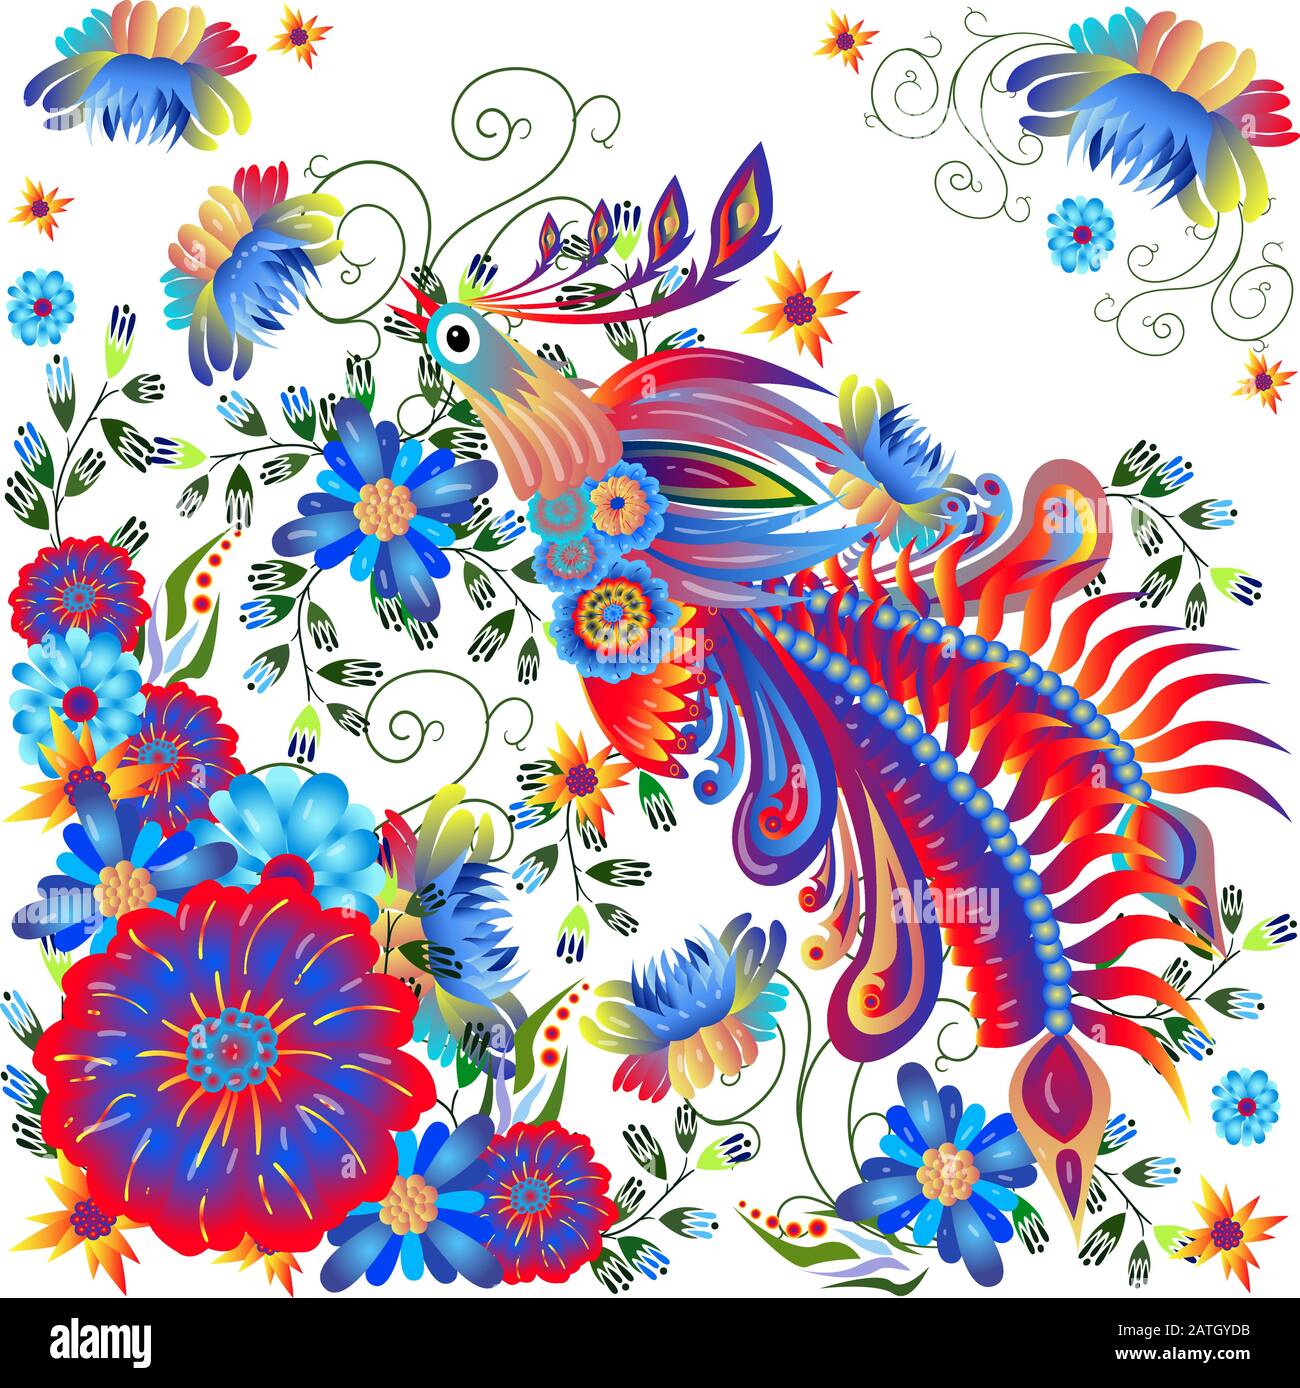 Floral ukrainian vector image. Flower in the style of Petrykivka painting. Isolated element for design Stock Vector